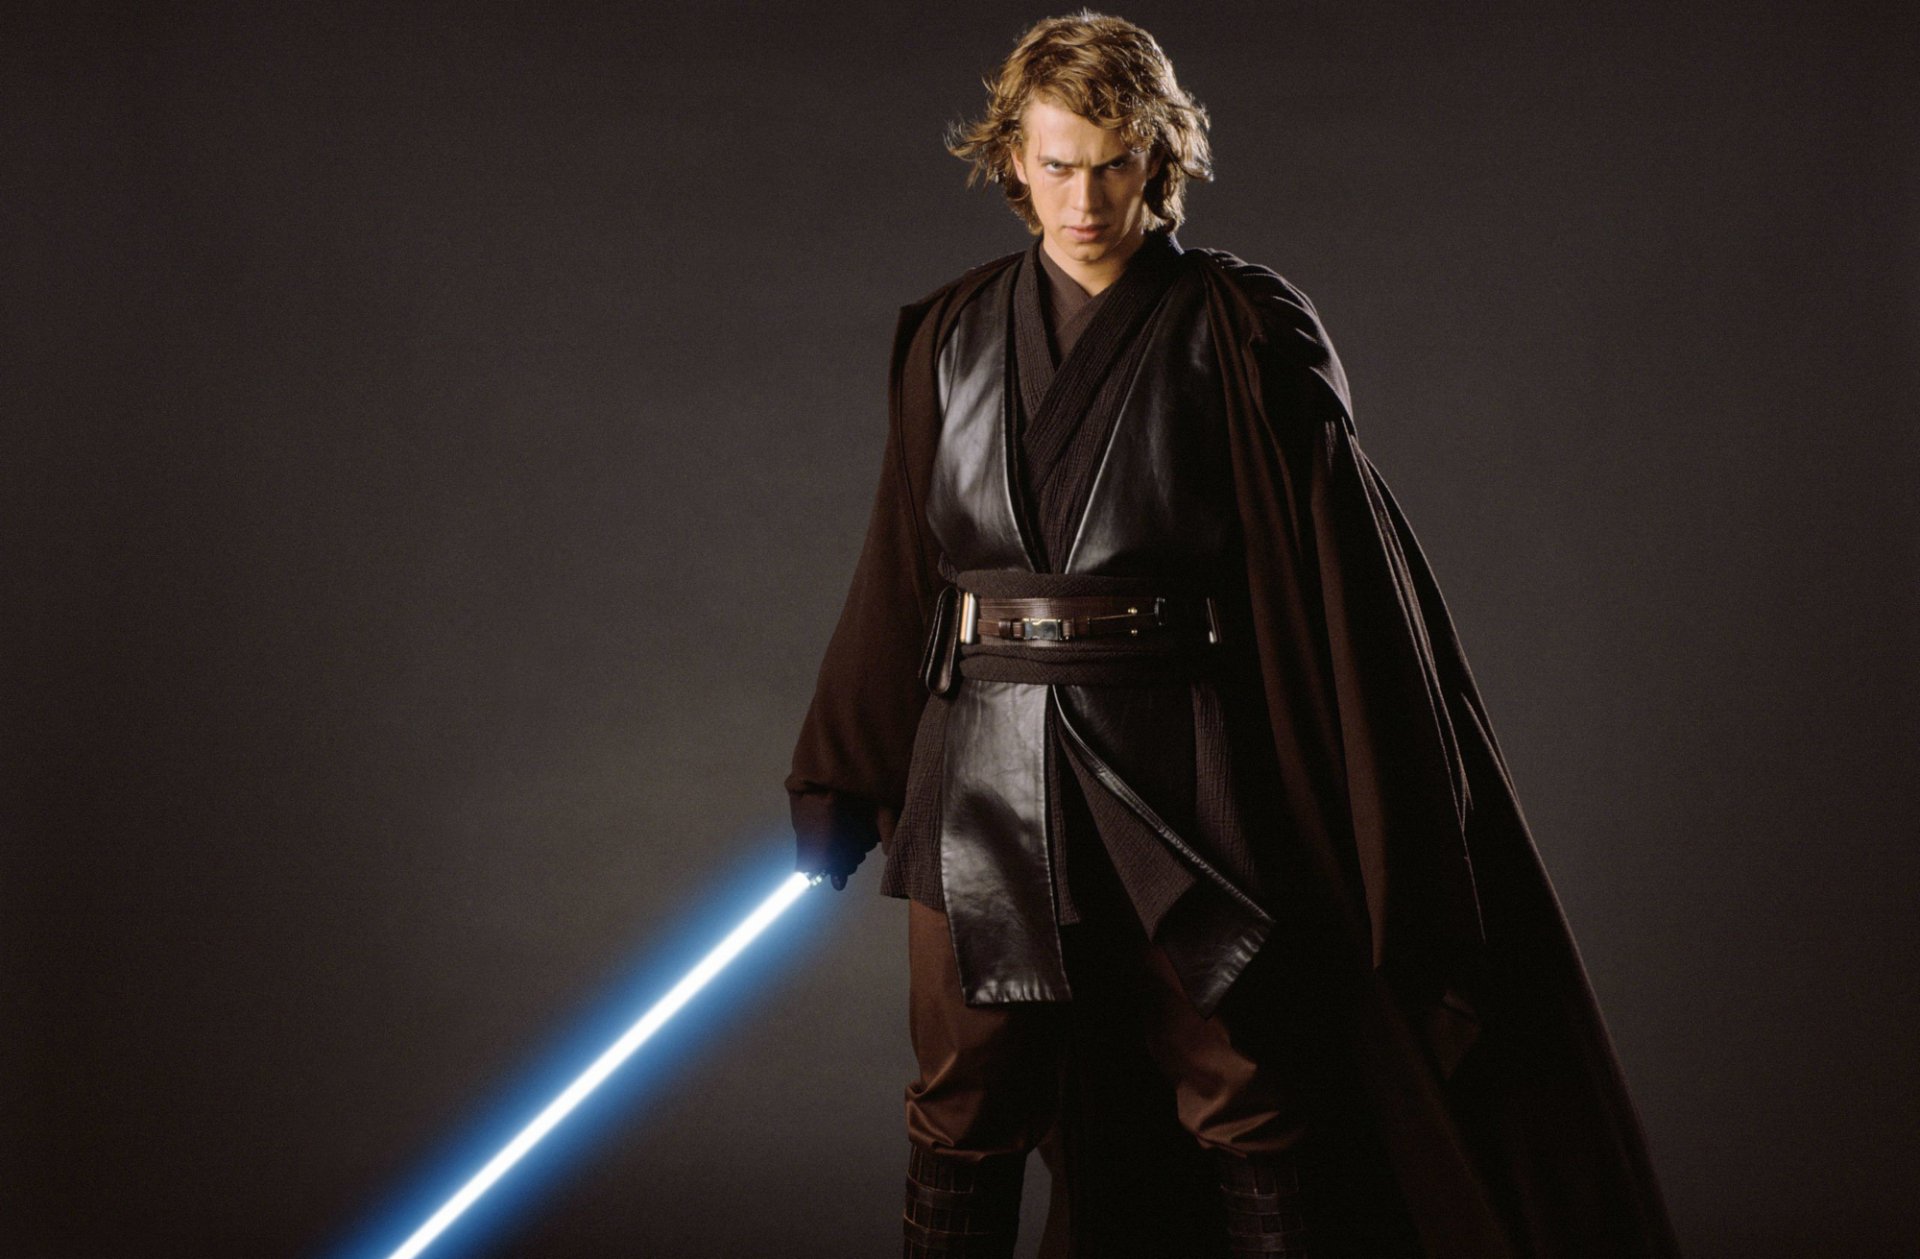 Star Wars Ep. III: Revenge of the Sith download